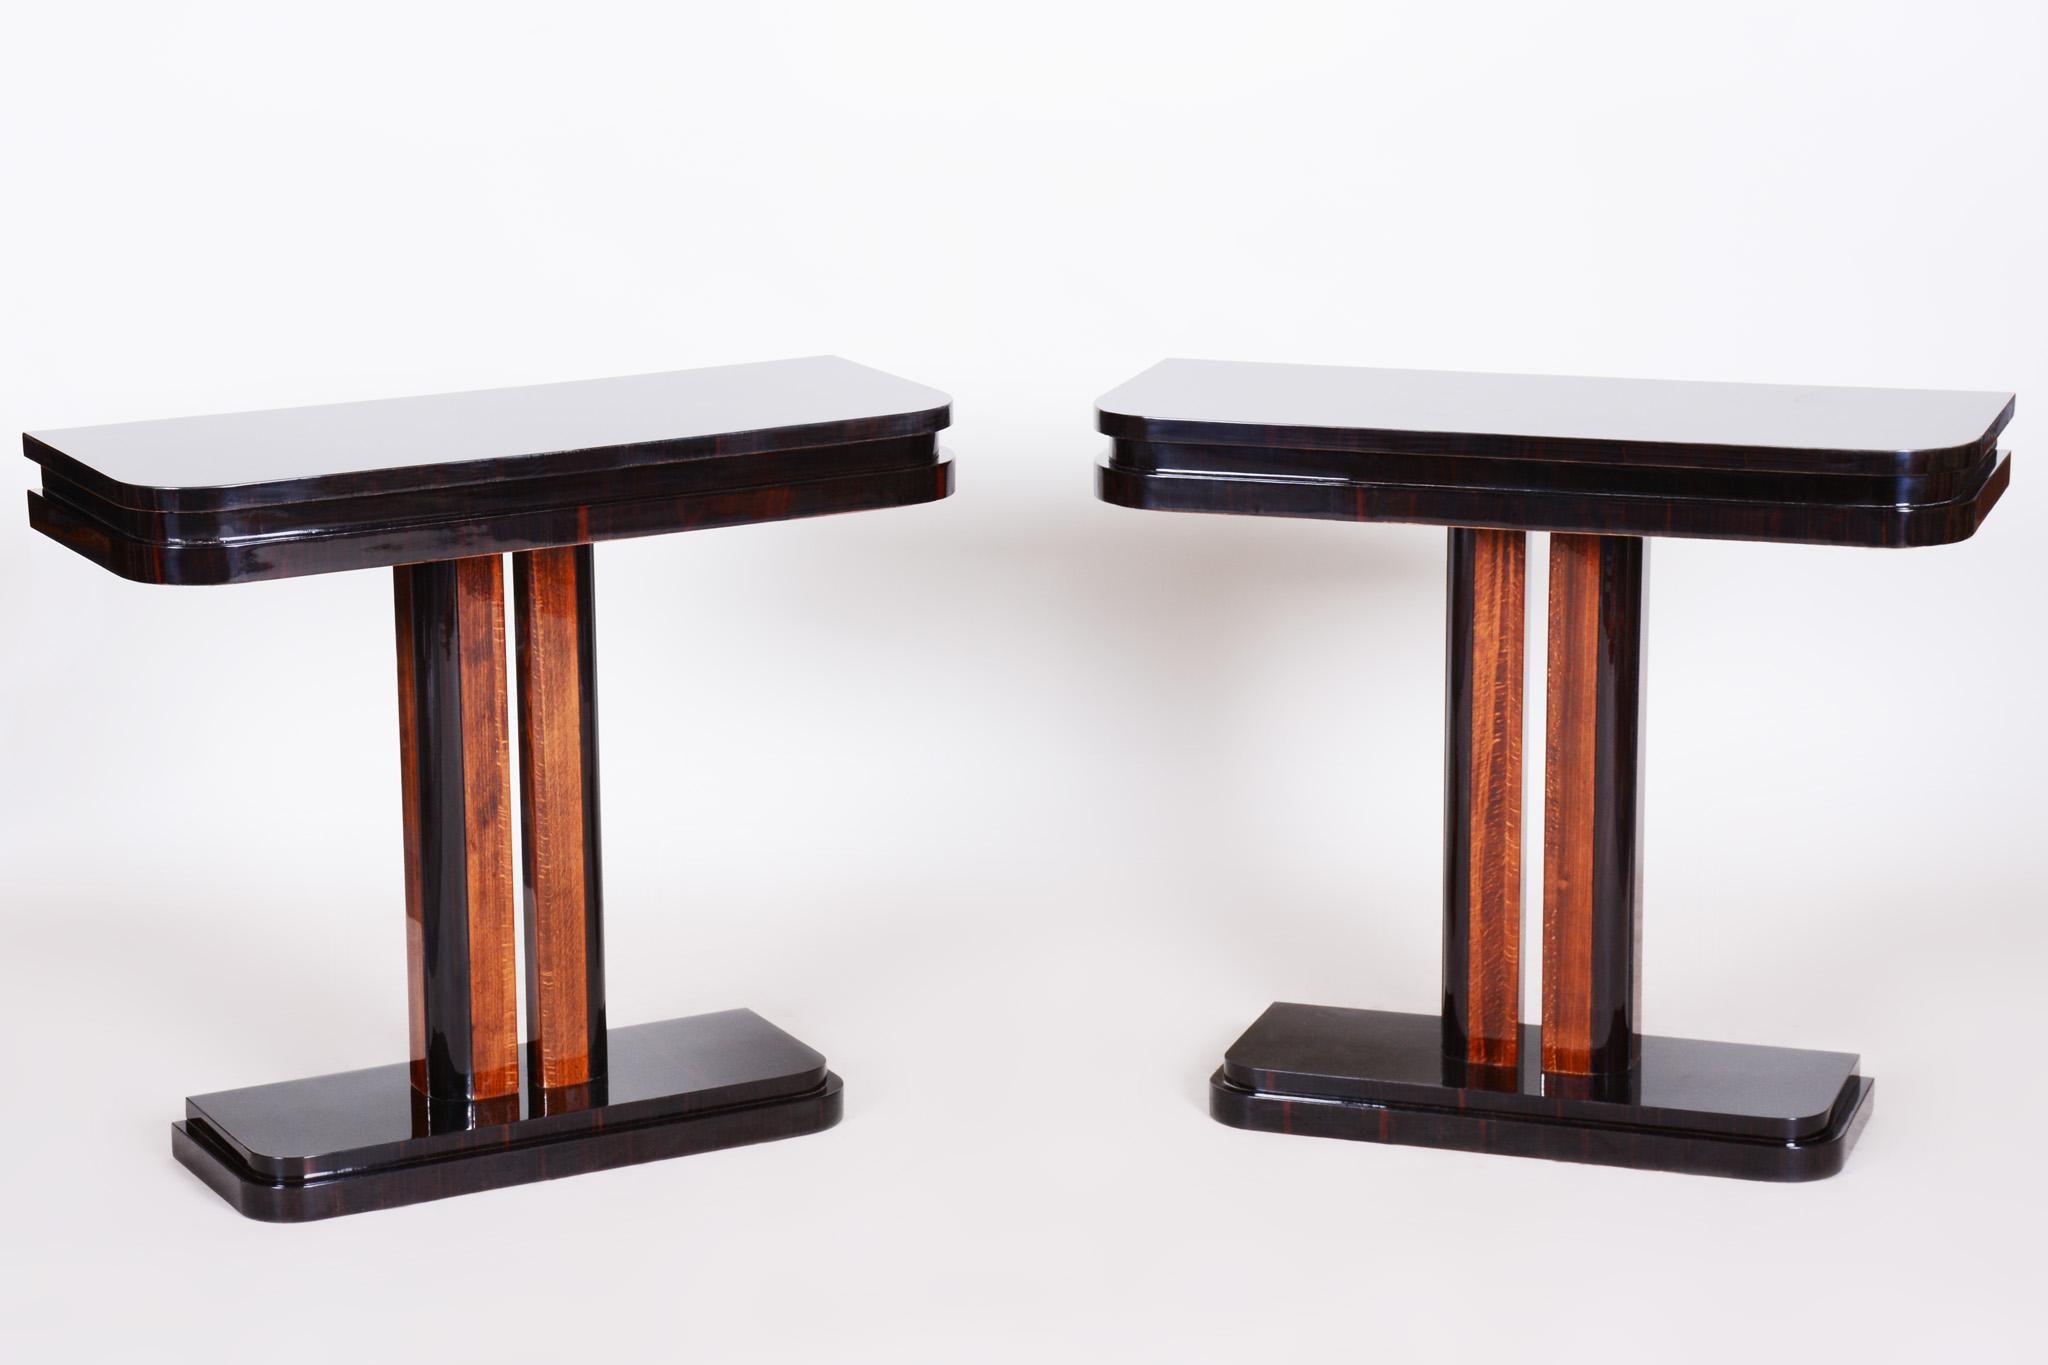 Pair of Art Deco bed-side tables from France
Completely restored
Material: Makasar ebony
Period: 1920-1929.